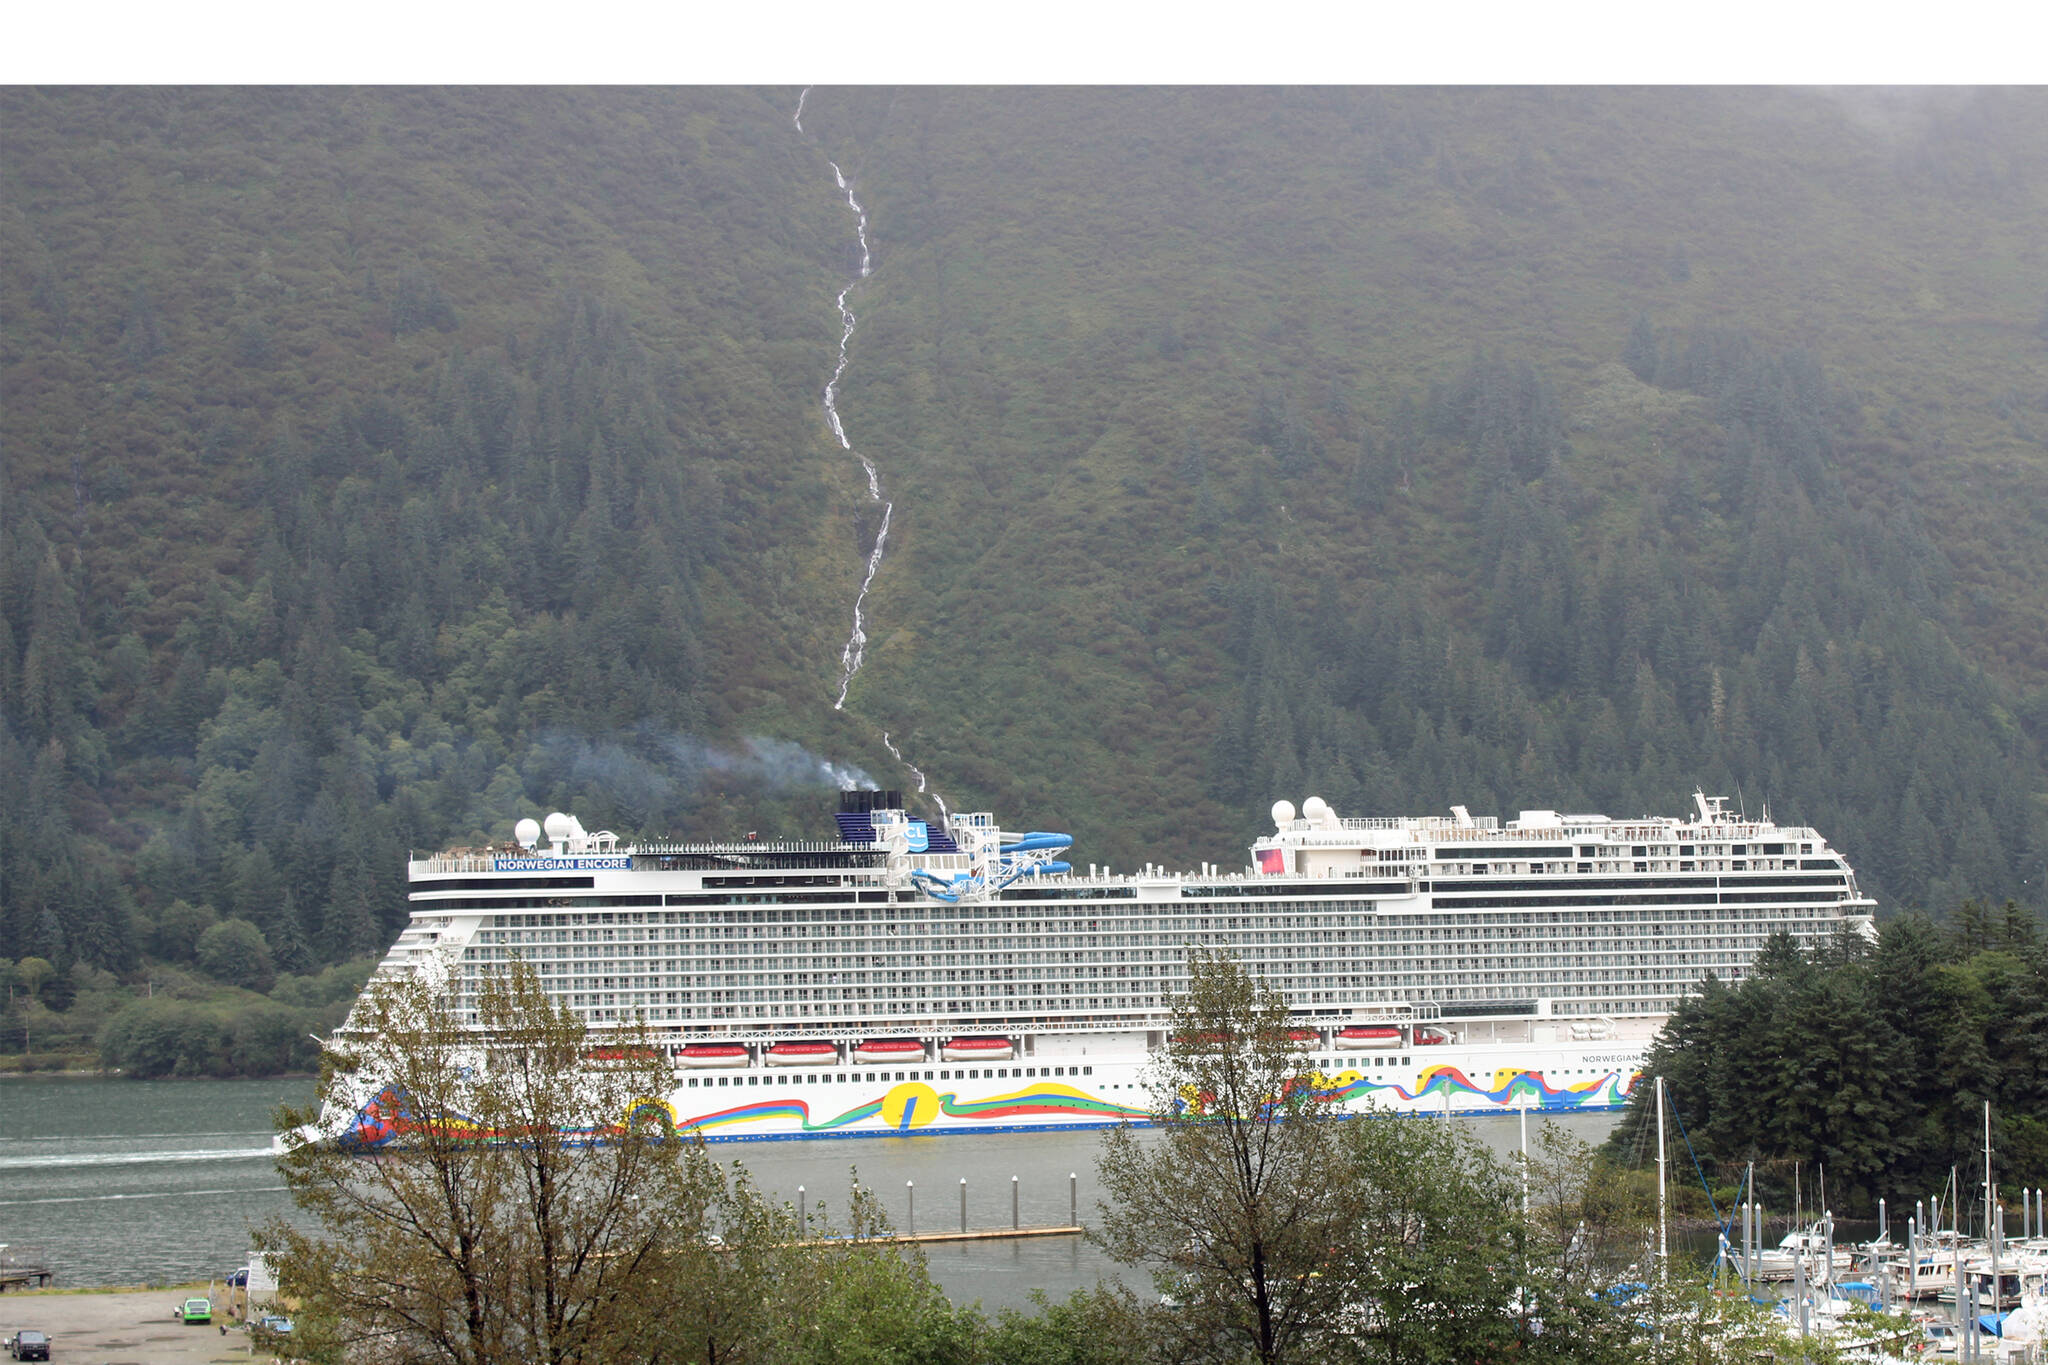 The Norwegian Encore sails past Douglas Island on Sept. 8, 2021. The Encore was visiting Juneau as part of an abbreviated cruise season this summer after COVID-19 canceled the 2020 season. The City and Borough of Juneau is currently offering an online survey for residents to share their views on the tourism industry. One of the survey questions addresses the proposal from Norwegian Cruise Lines to build a cruise ship dock on its waterfront property on Egan Drive. (Dana Zigmund/Juneau Empire)